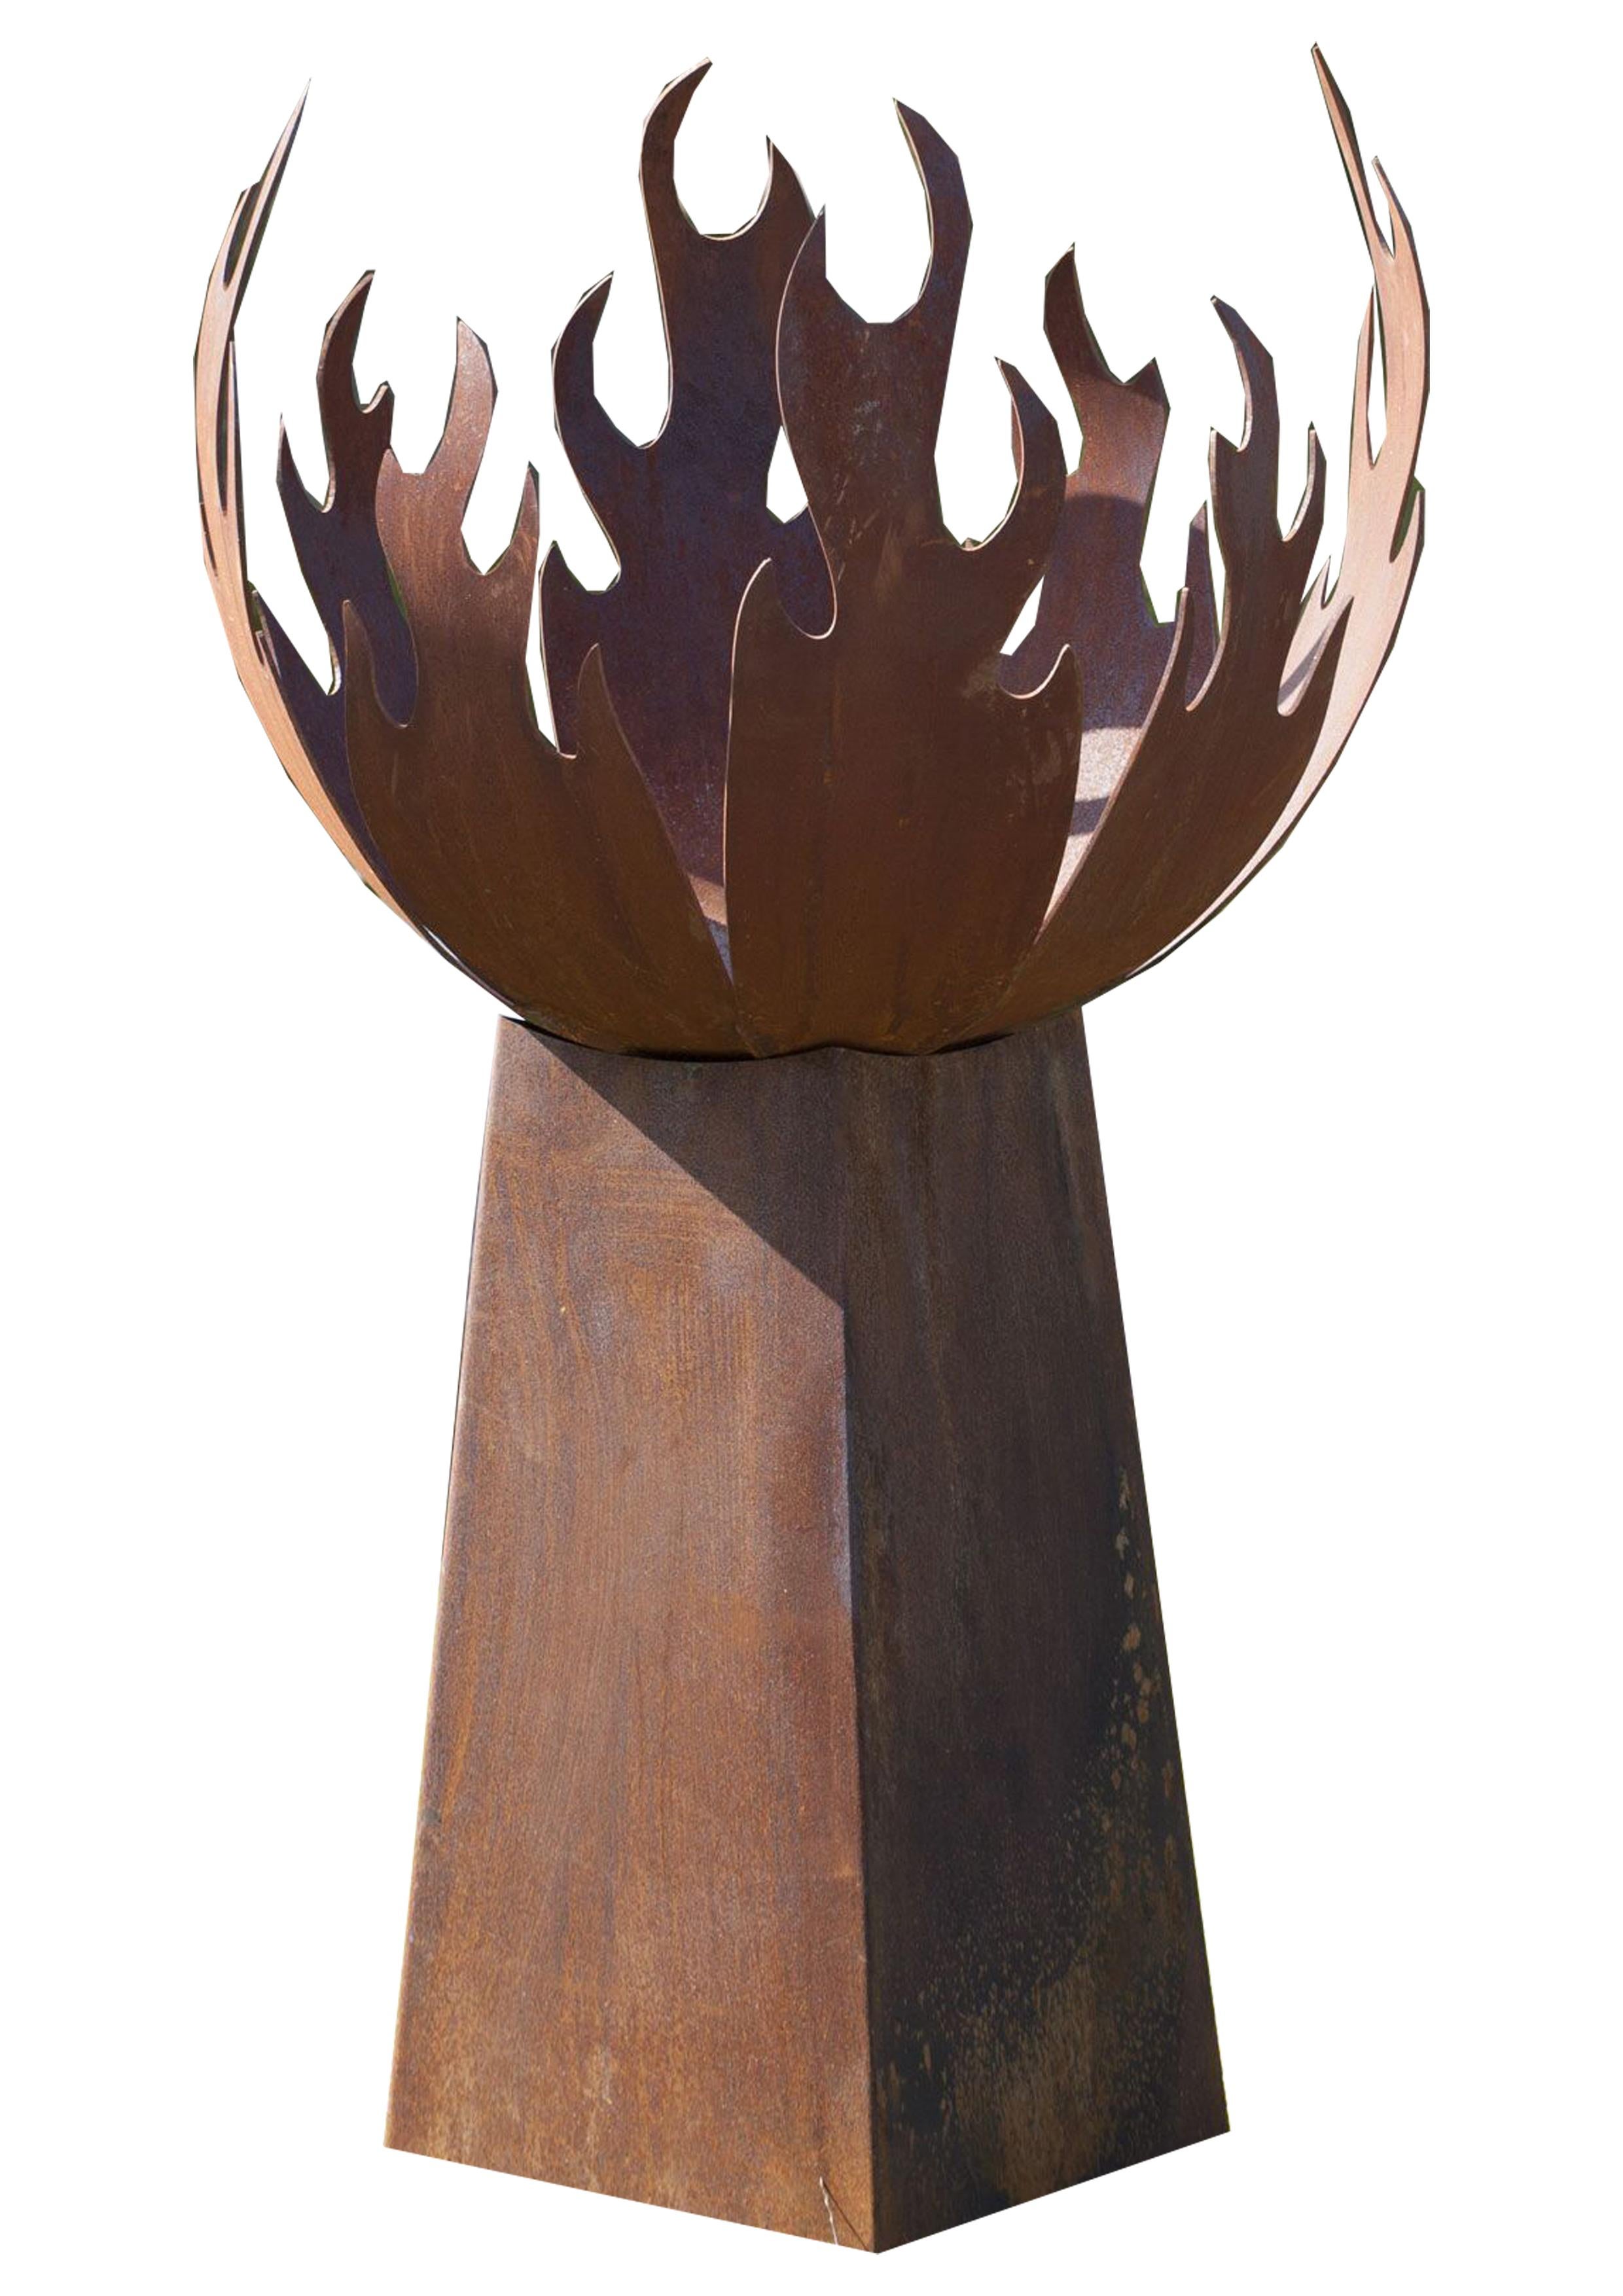 Shipping costs on request.
This flame flower is the eye-catcher in your garden.
Due to the great air supply you can very quickly a beautiful fire.
The base also serves as an ash tray, has an inserted bottom, but can also be used separately as can